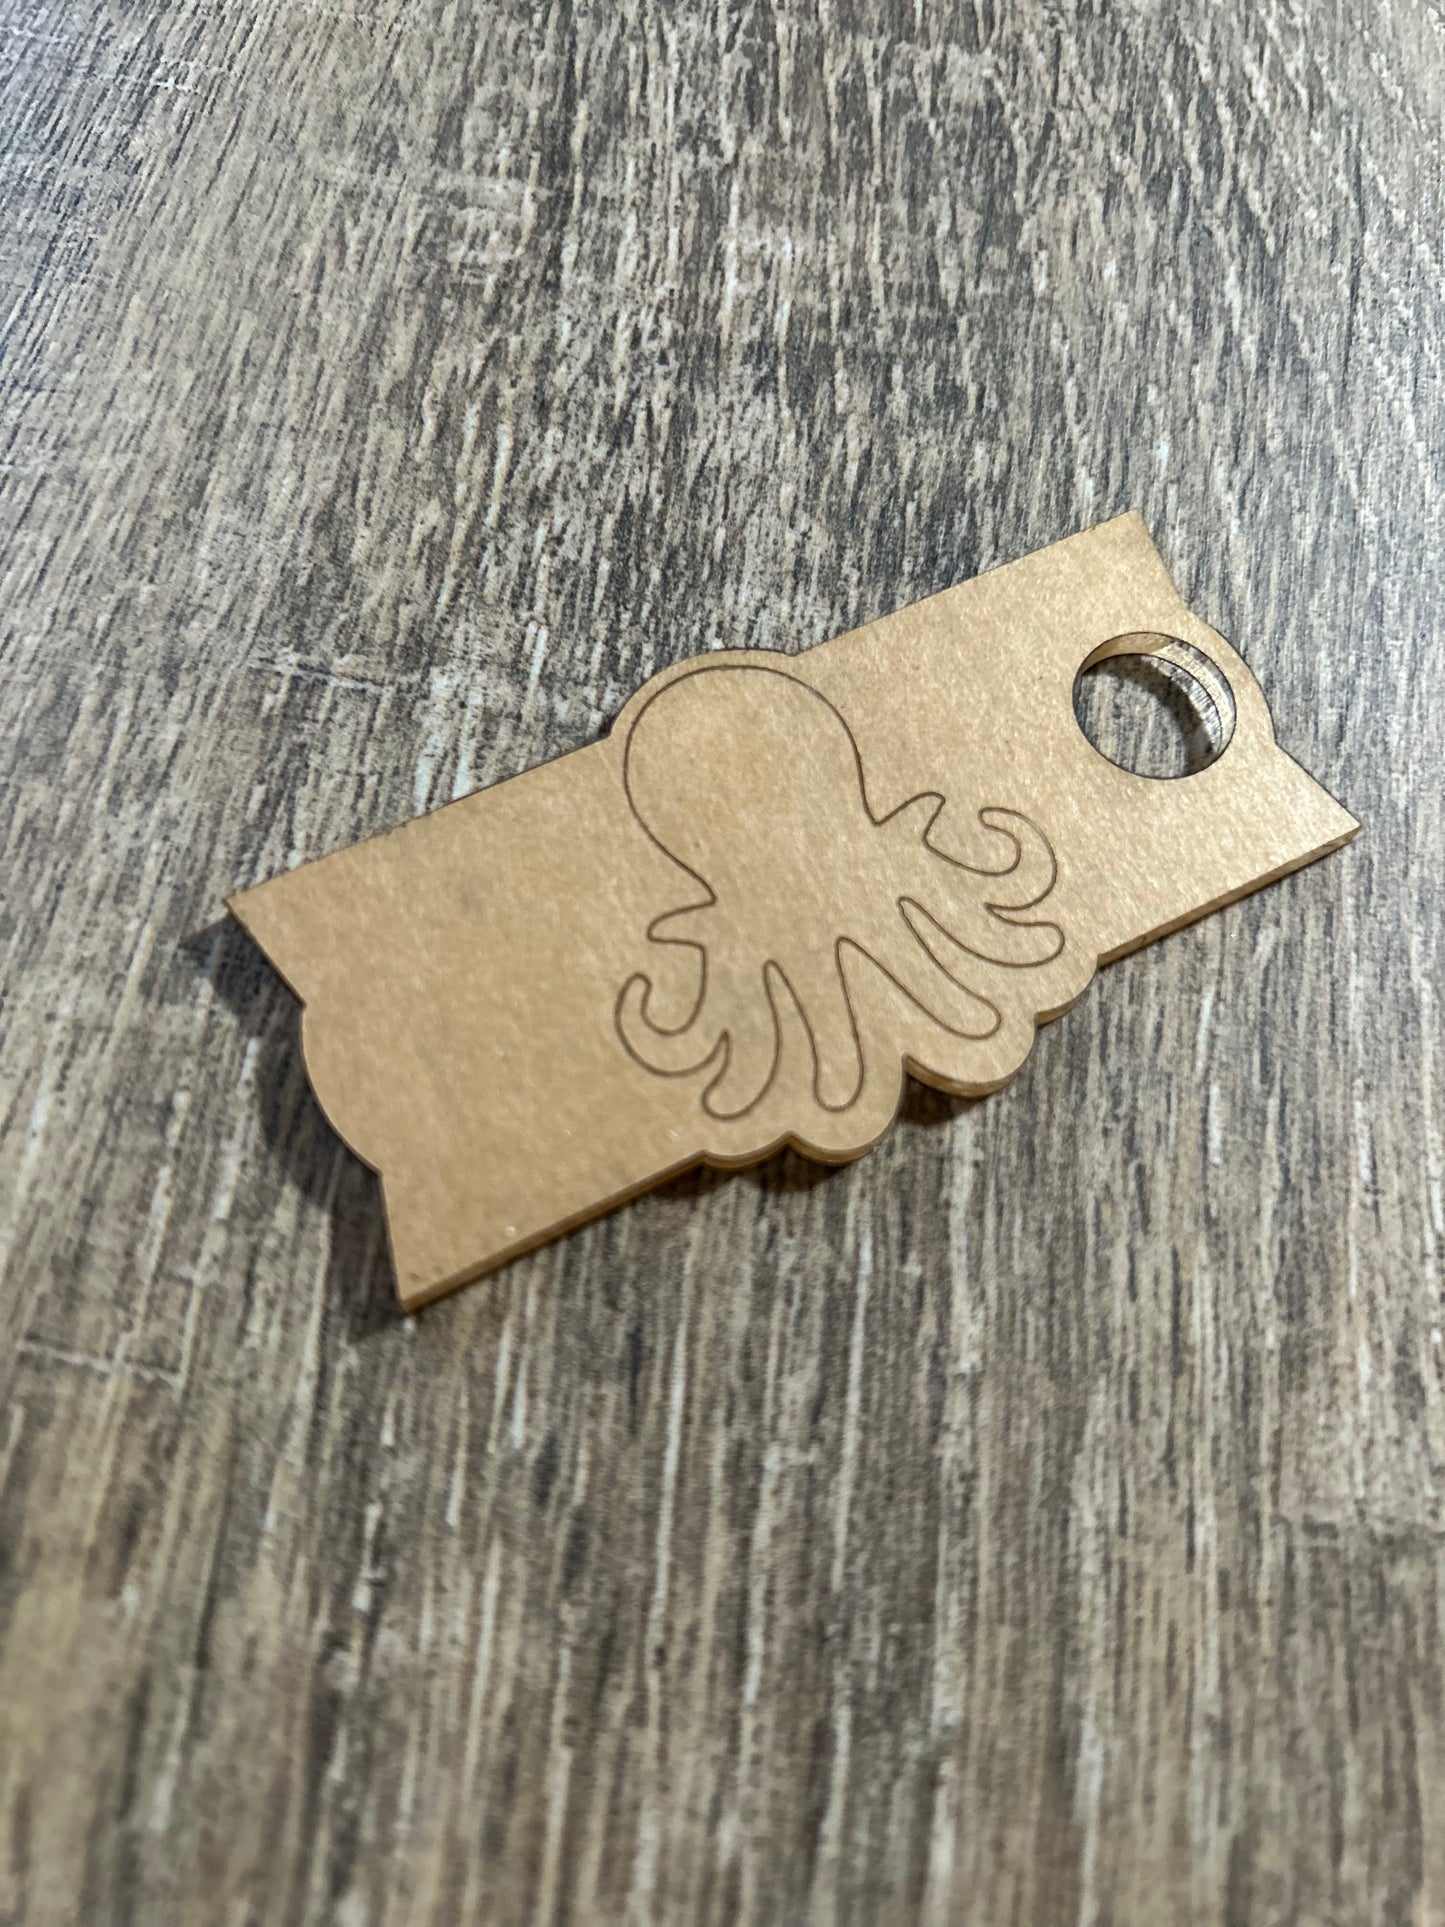 Stanley Octopus lid cover